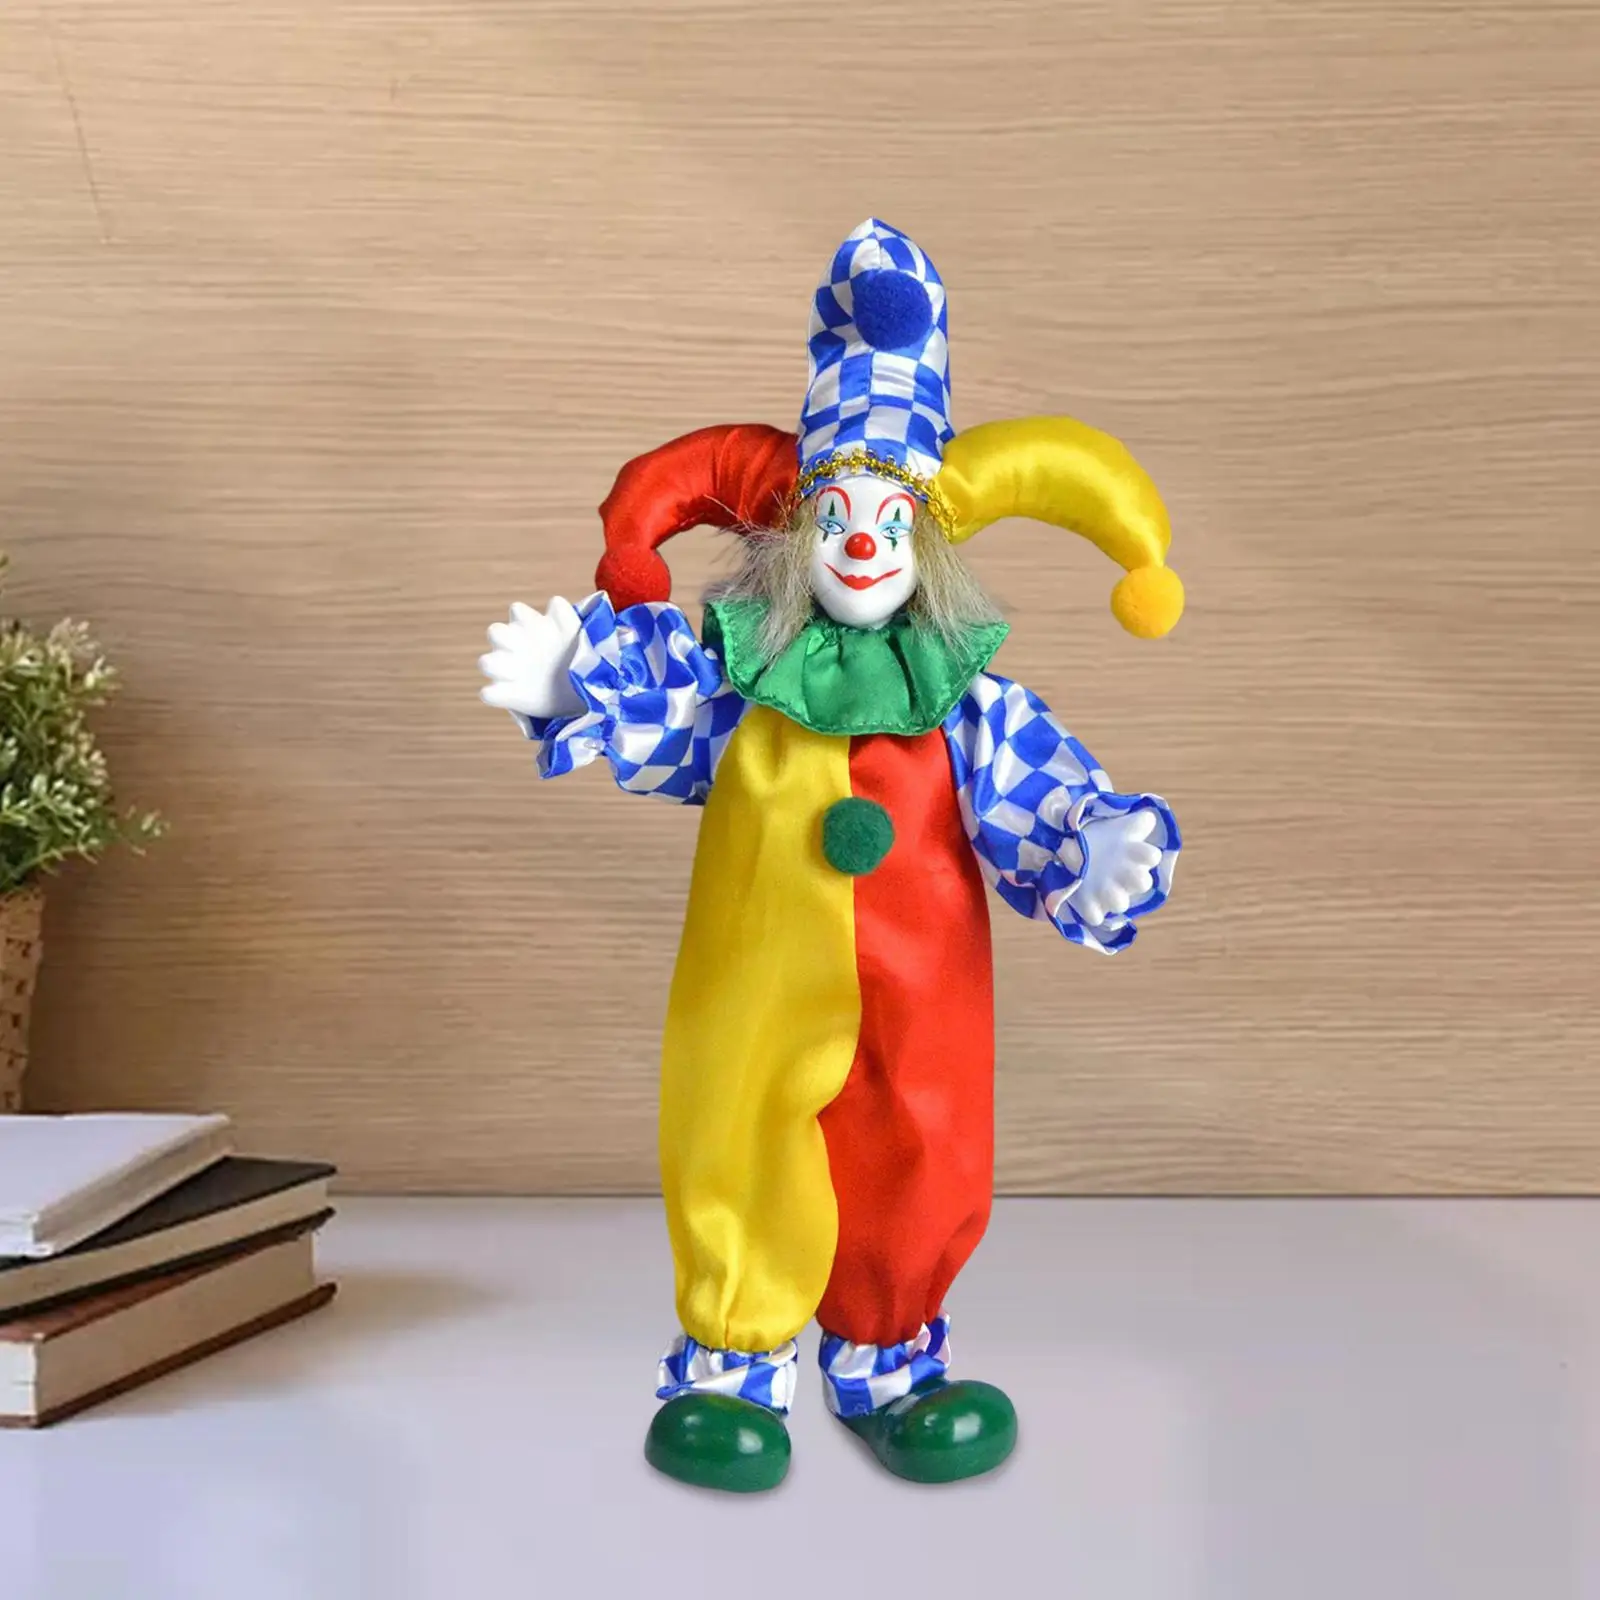 24cm Tall Clown Doll Figure with Clothes Arts Crafts Home Table Desk Decor Movable for Office Thanksgiving Halloween Decor